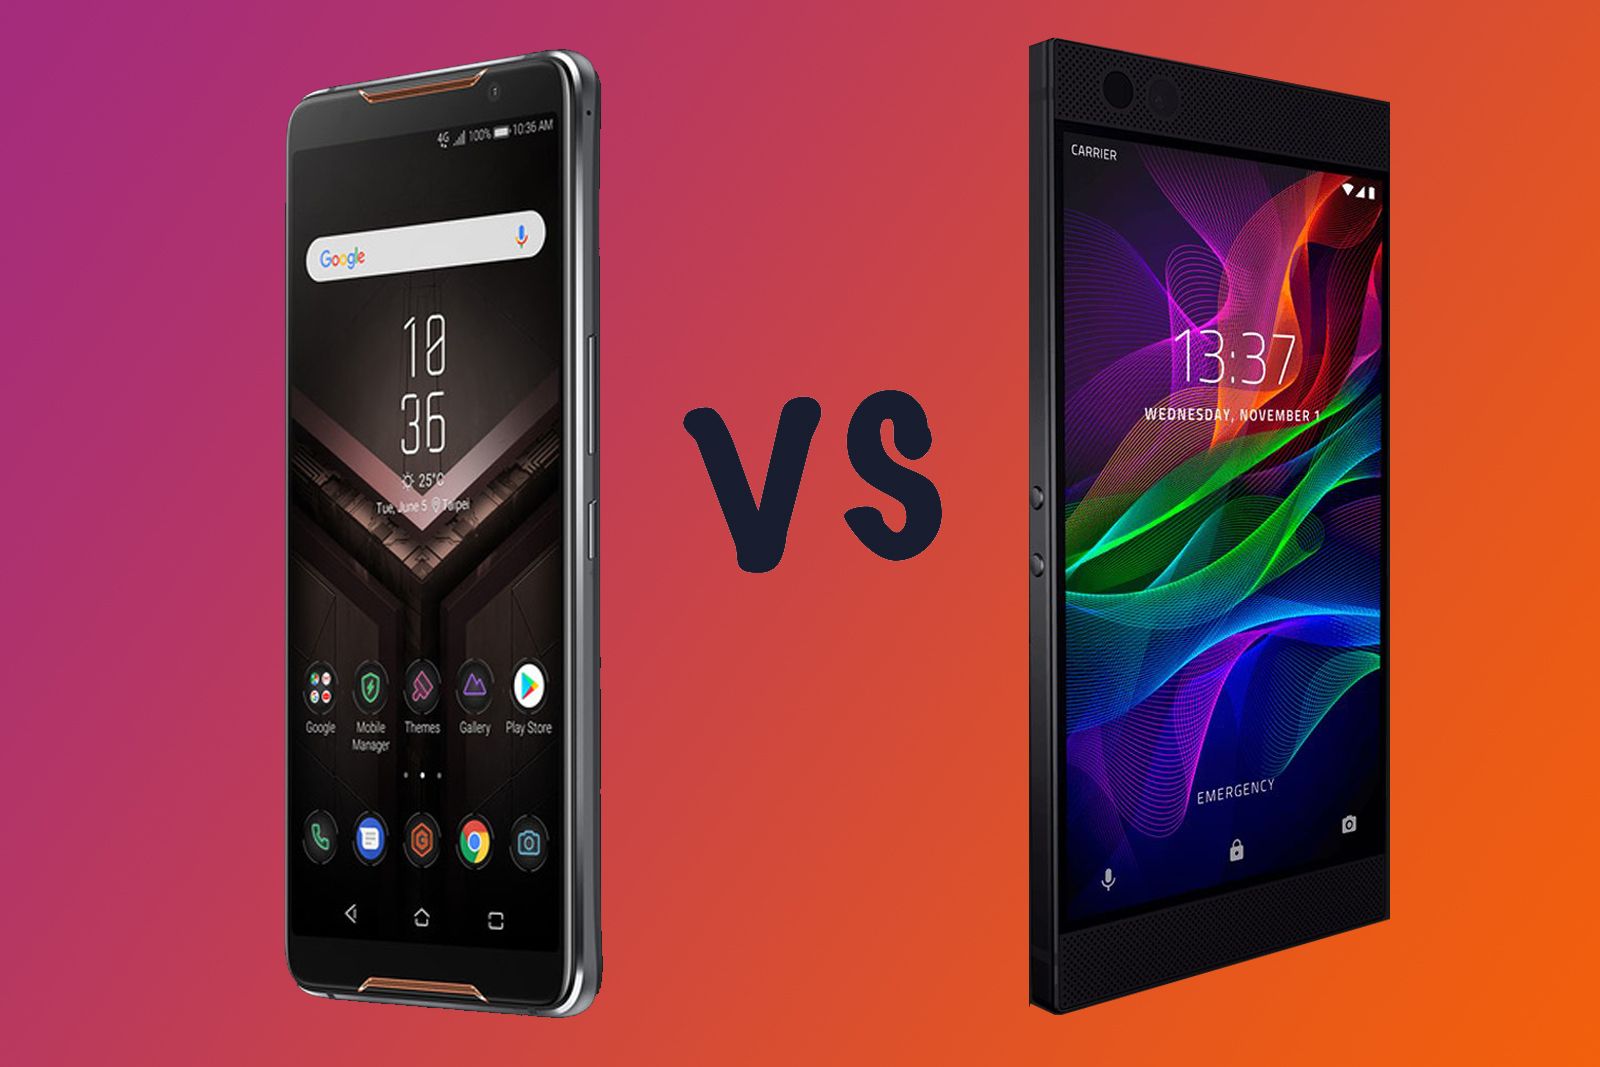 Asus ROG Phone vs Razer Phone Whats the difference image 1